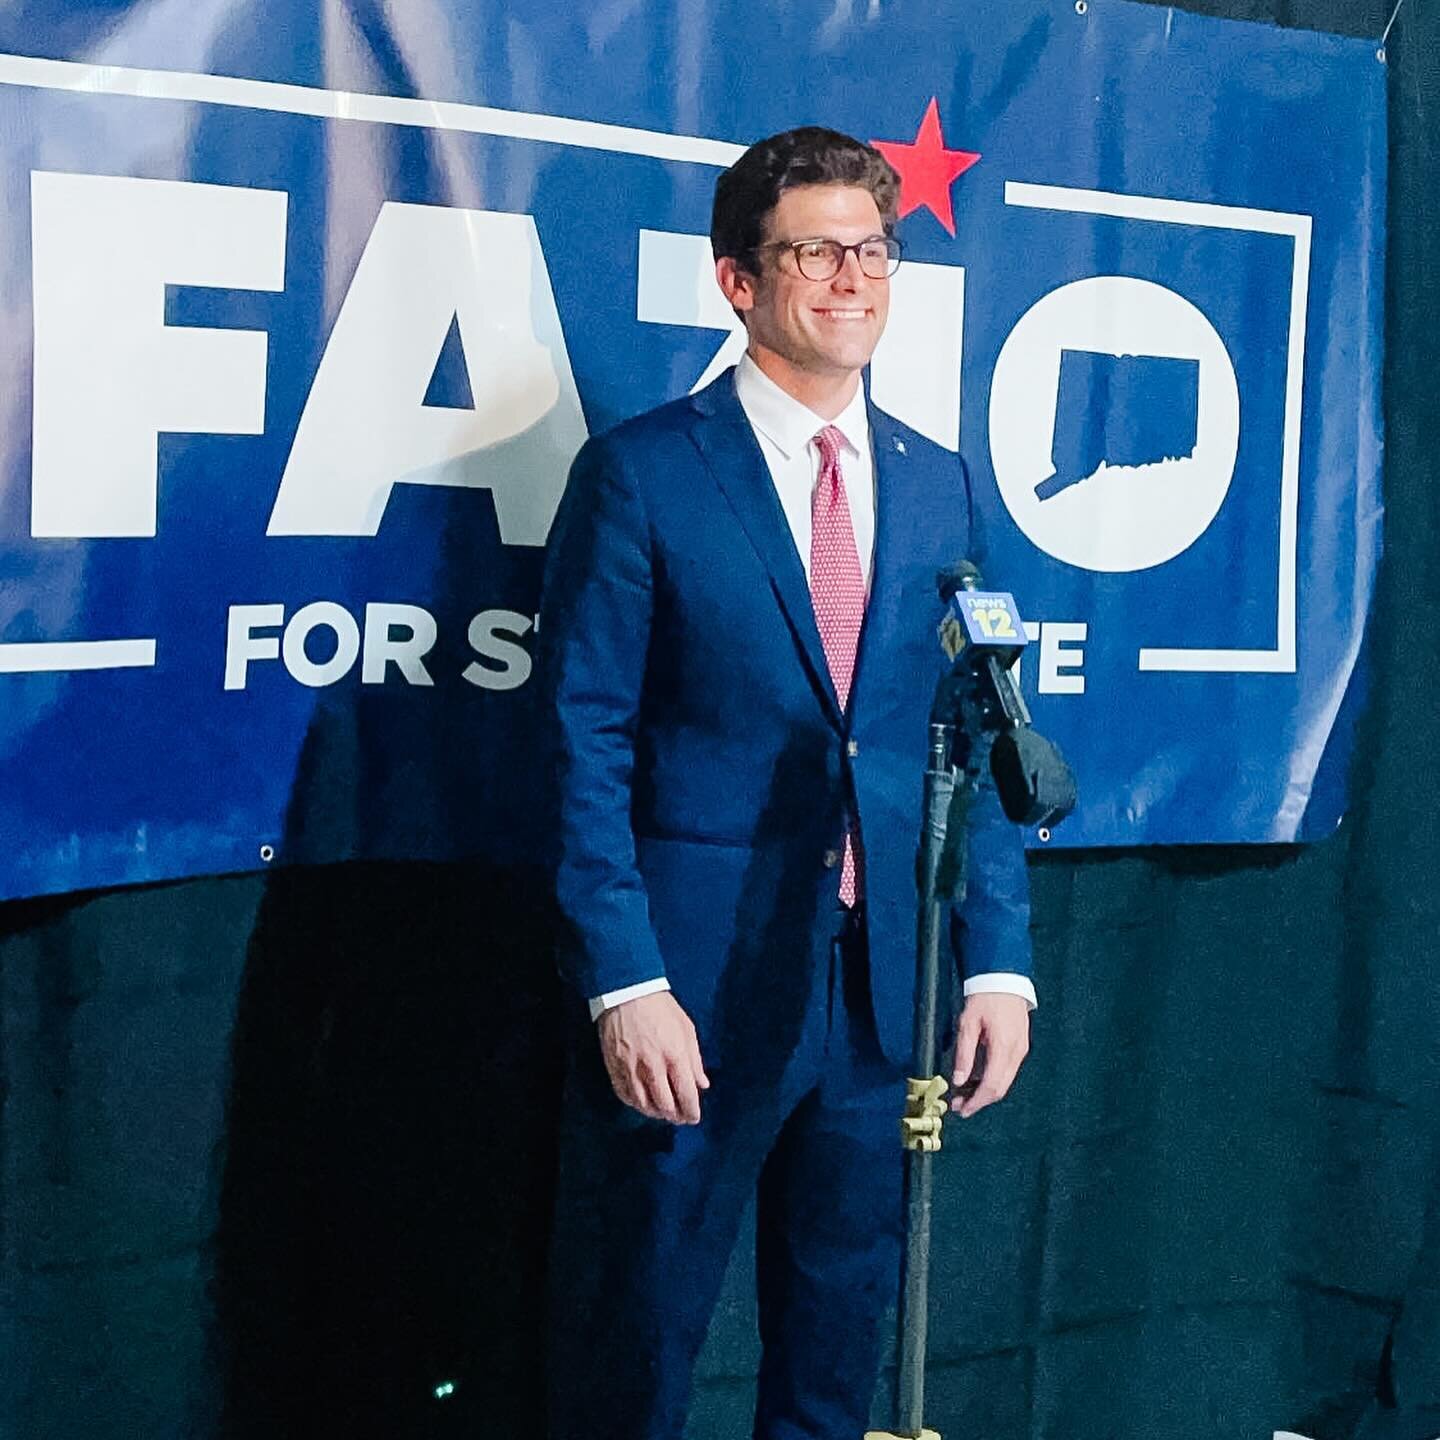 Looking back on a significant campaign triumph with Republican @ryanfazioct  victory in the Connecticut State Senate District 36 Special Election in 2021. Against the odds in a district that Biden won by 25 points in 2020, Fazio emerged victorious, d